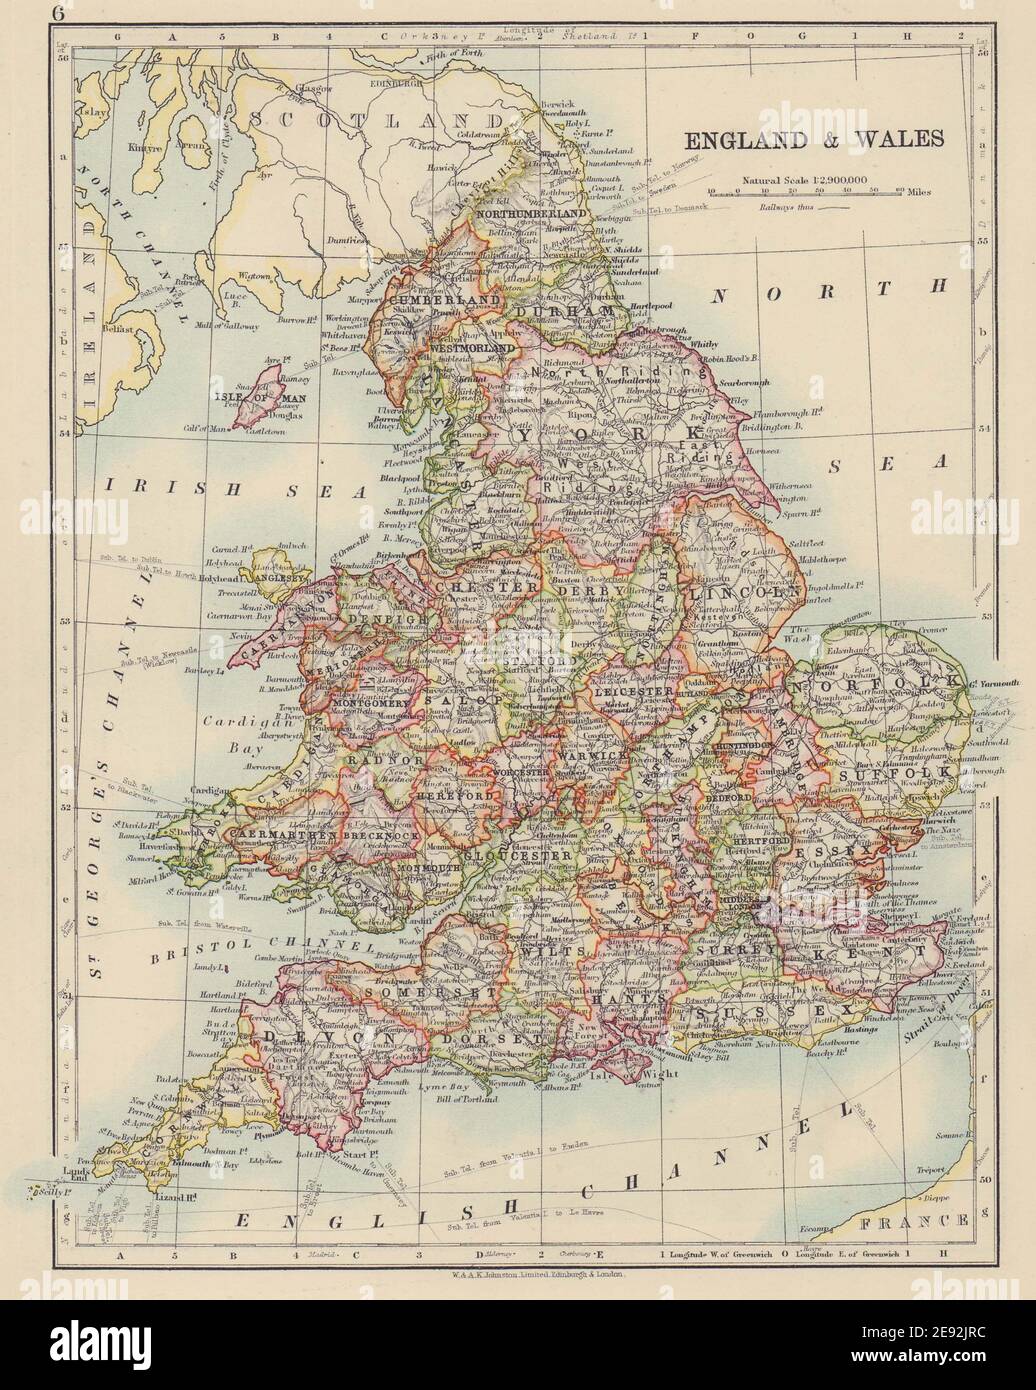 ENGLAND AND WALES. Counties. Westmorland. Telegraph cables. JOHNSTON 1910 map Stock Photo